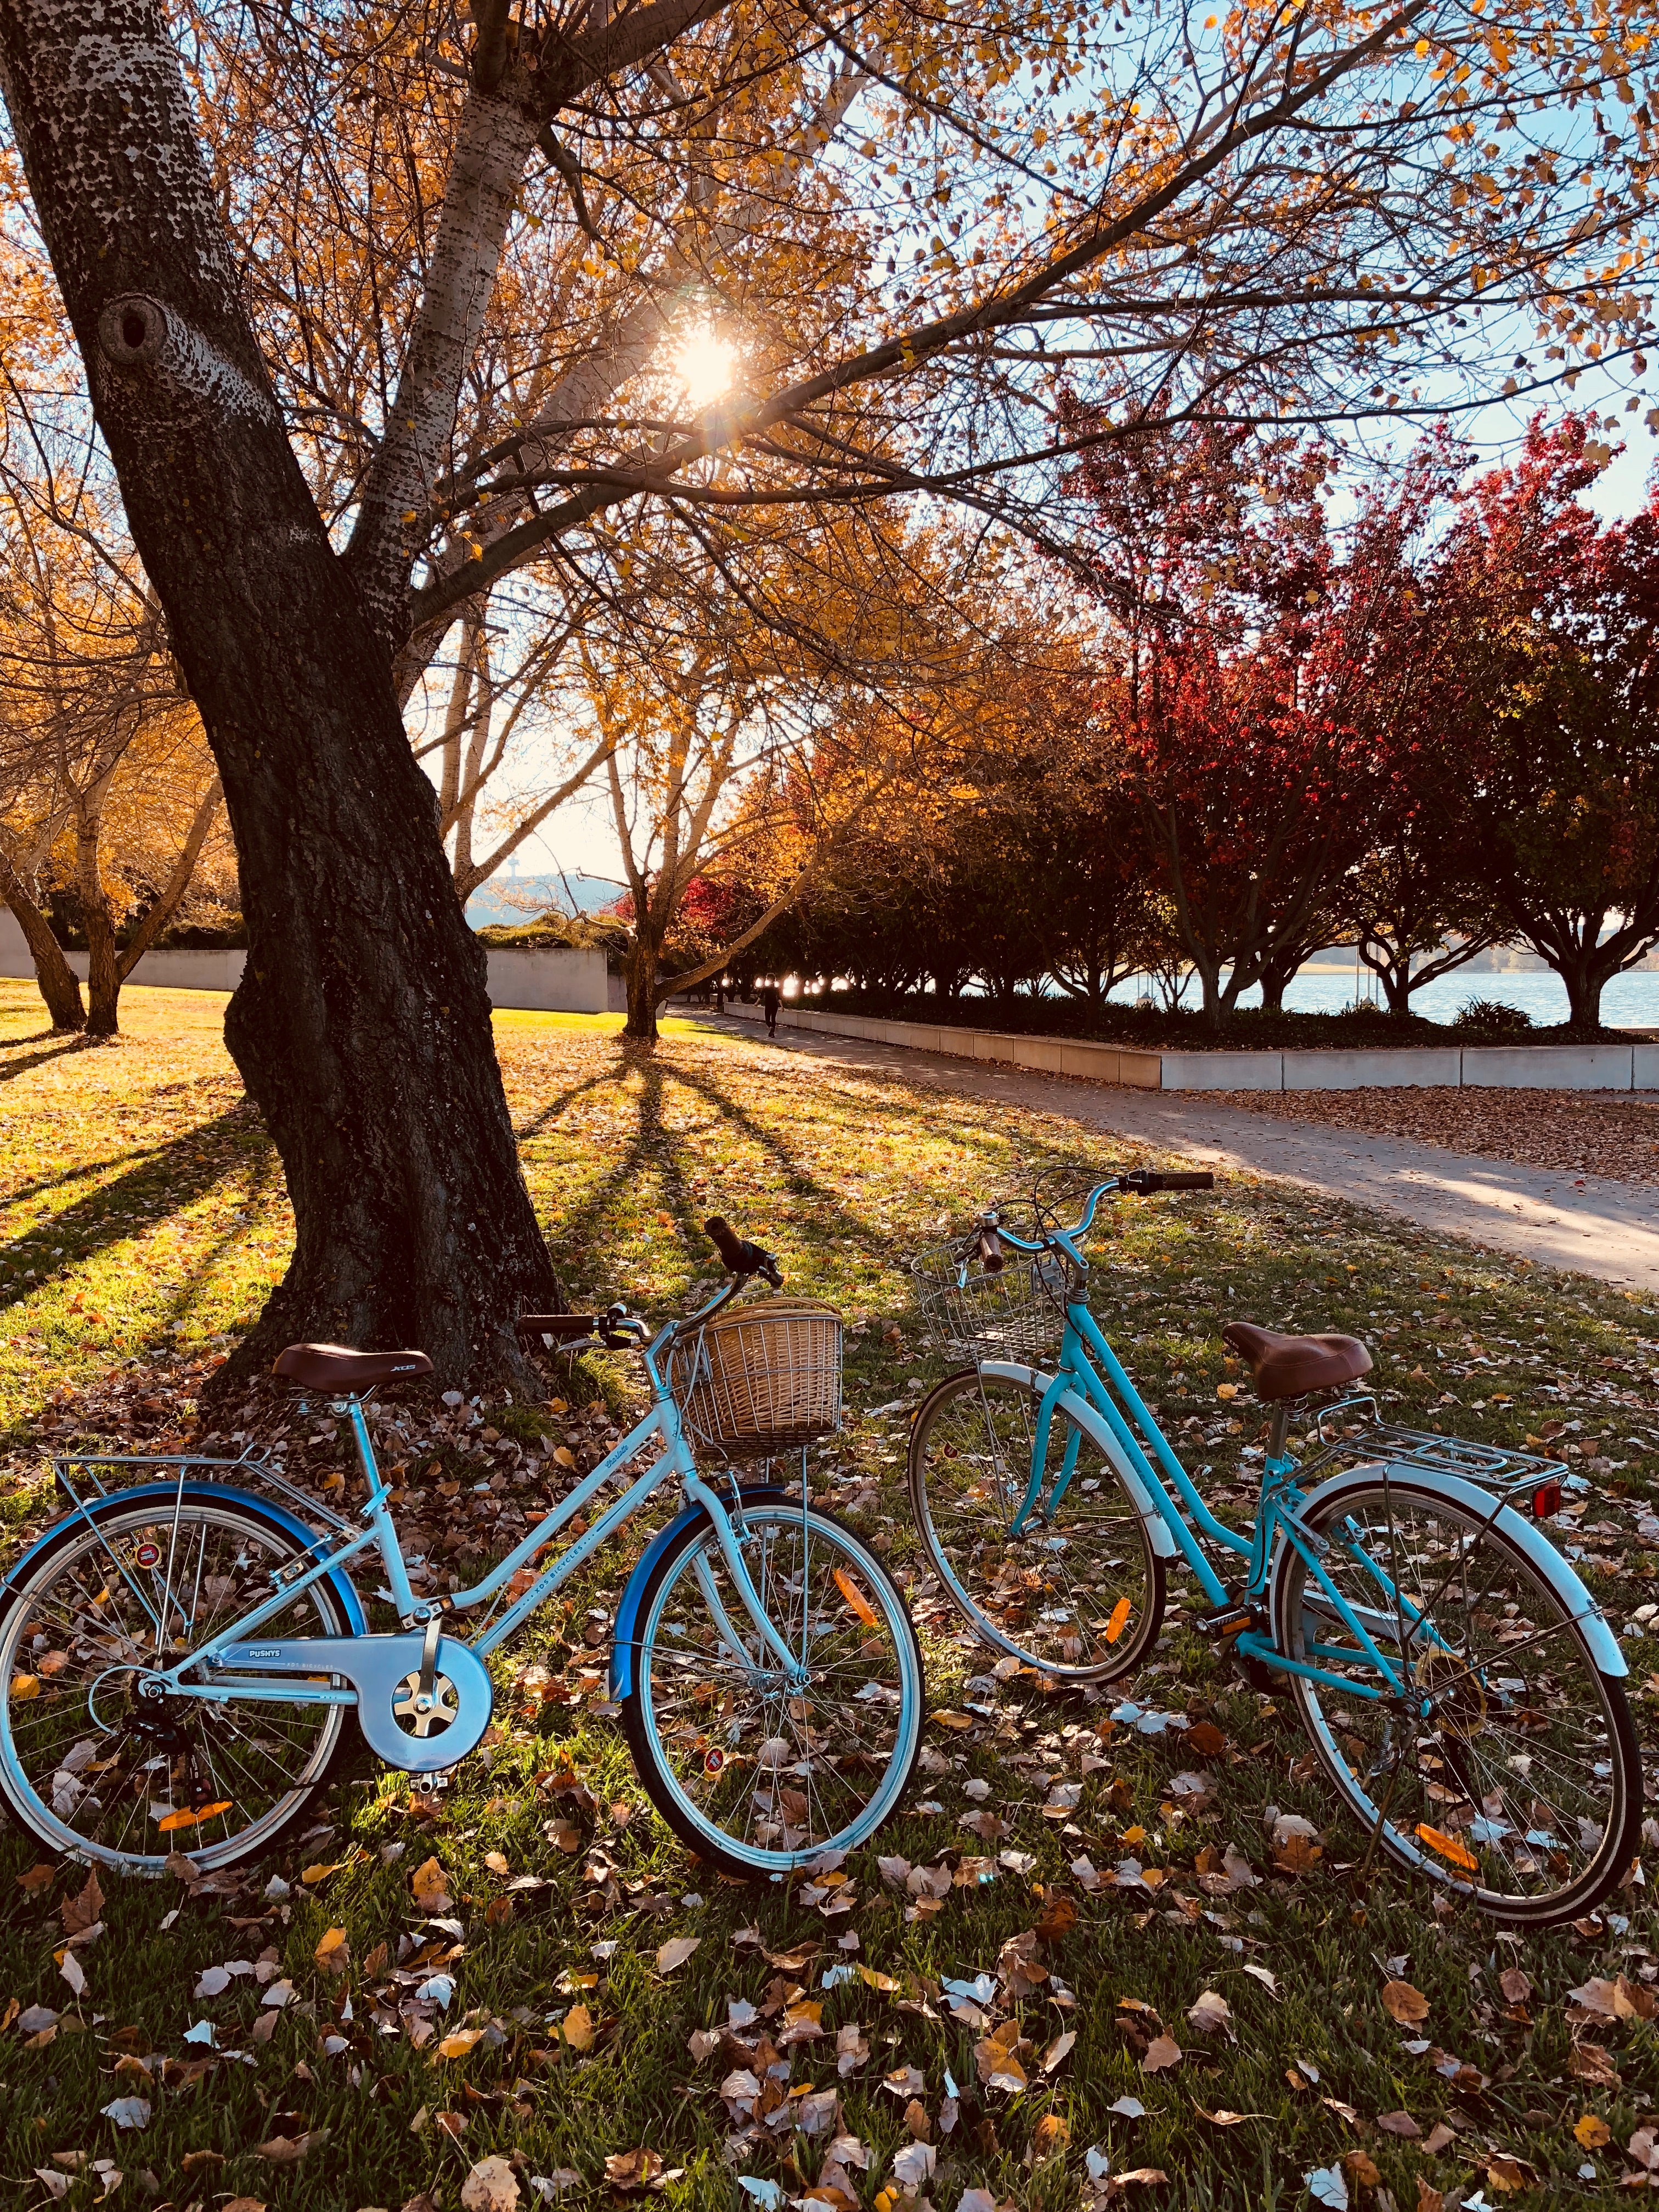 Popular Bicycles Image for Phone